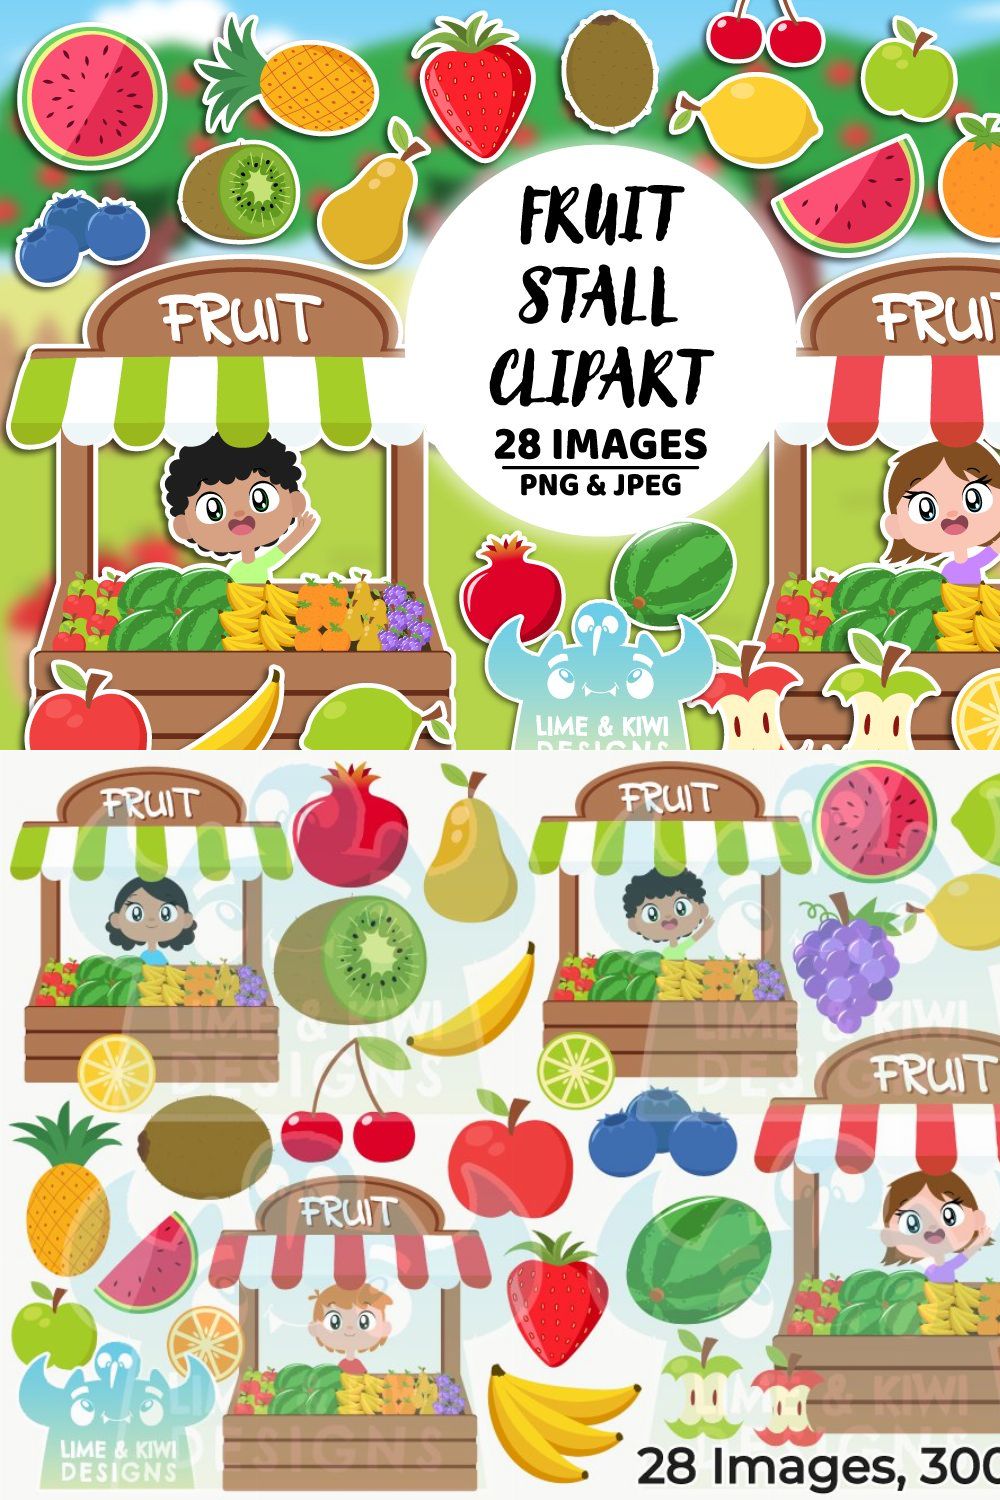 Fruit Stall Clipart pinterest preview image.